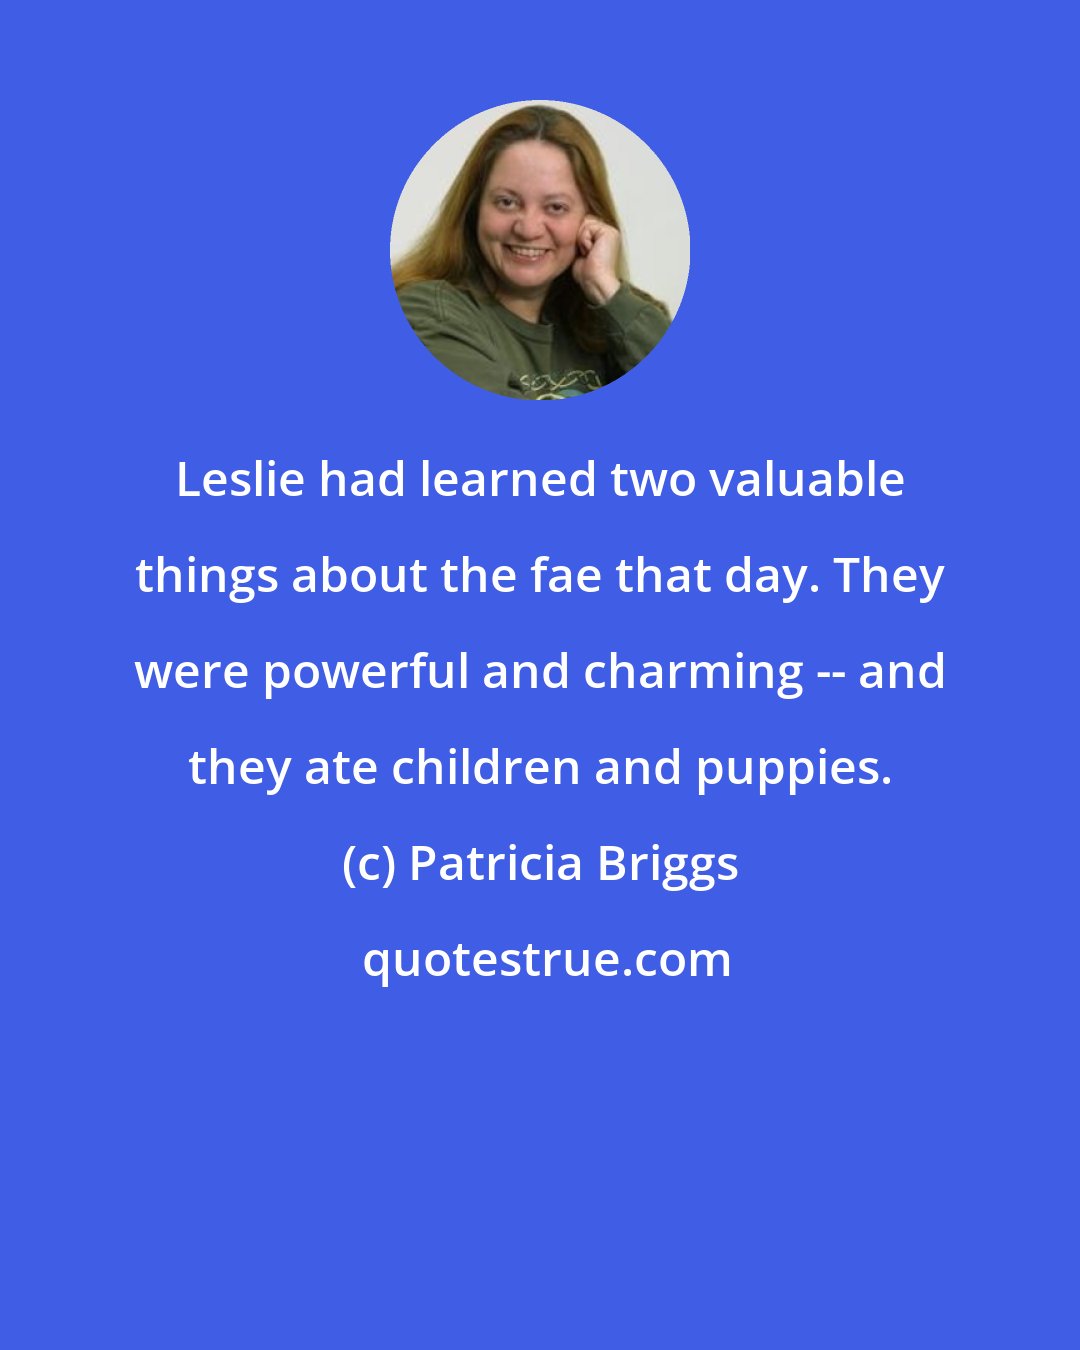 Patricia Briggs: Leslie had learned two valuable things about the fae that day. They were powerful and charming -- and they ate children and puppies.